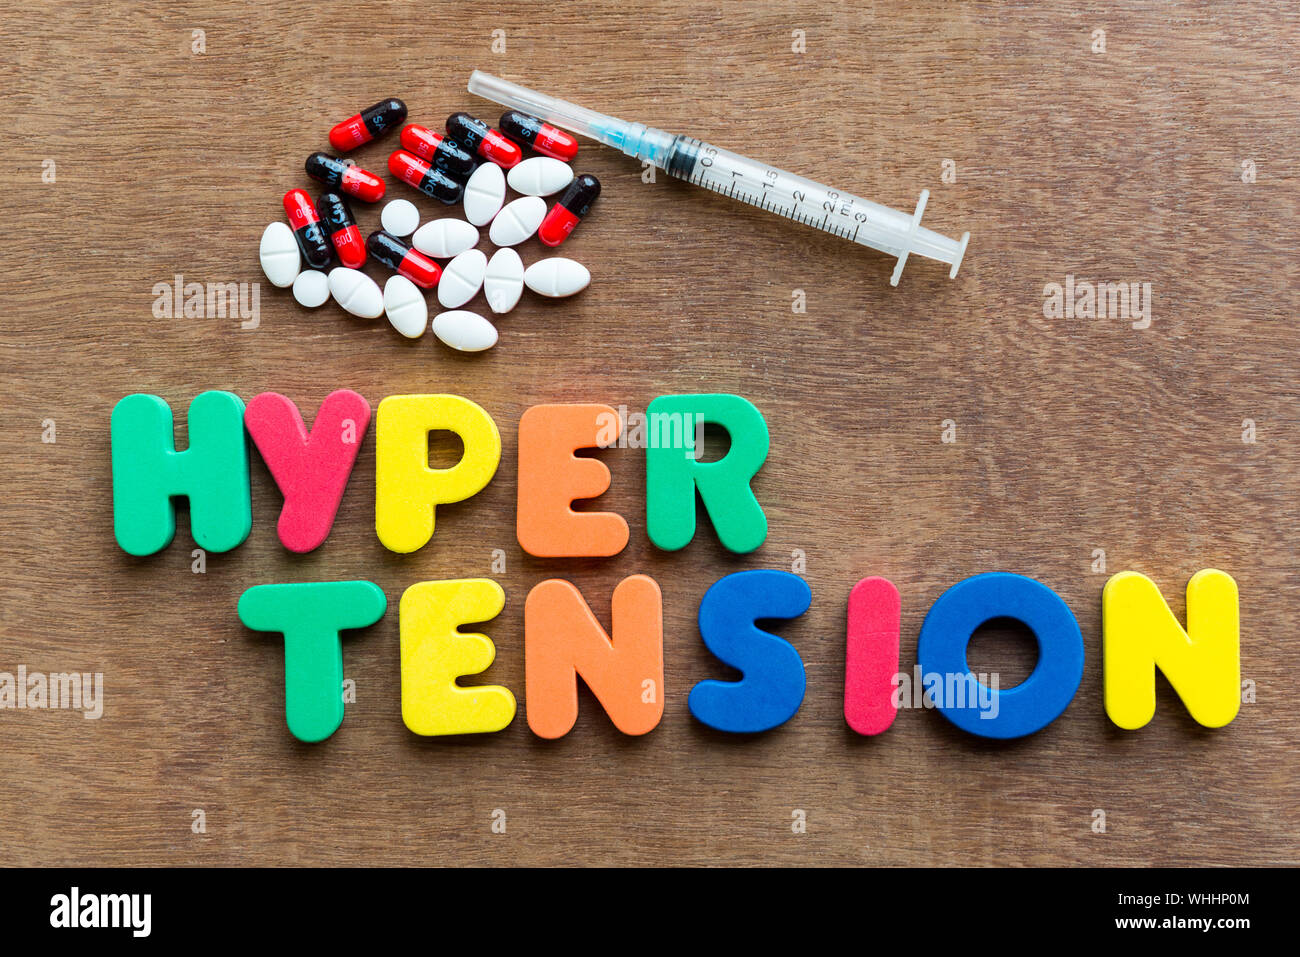 High Angle View Of Colorful Hyper Tension Text With Syringe And Pills On Wooden Table Stock Photo